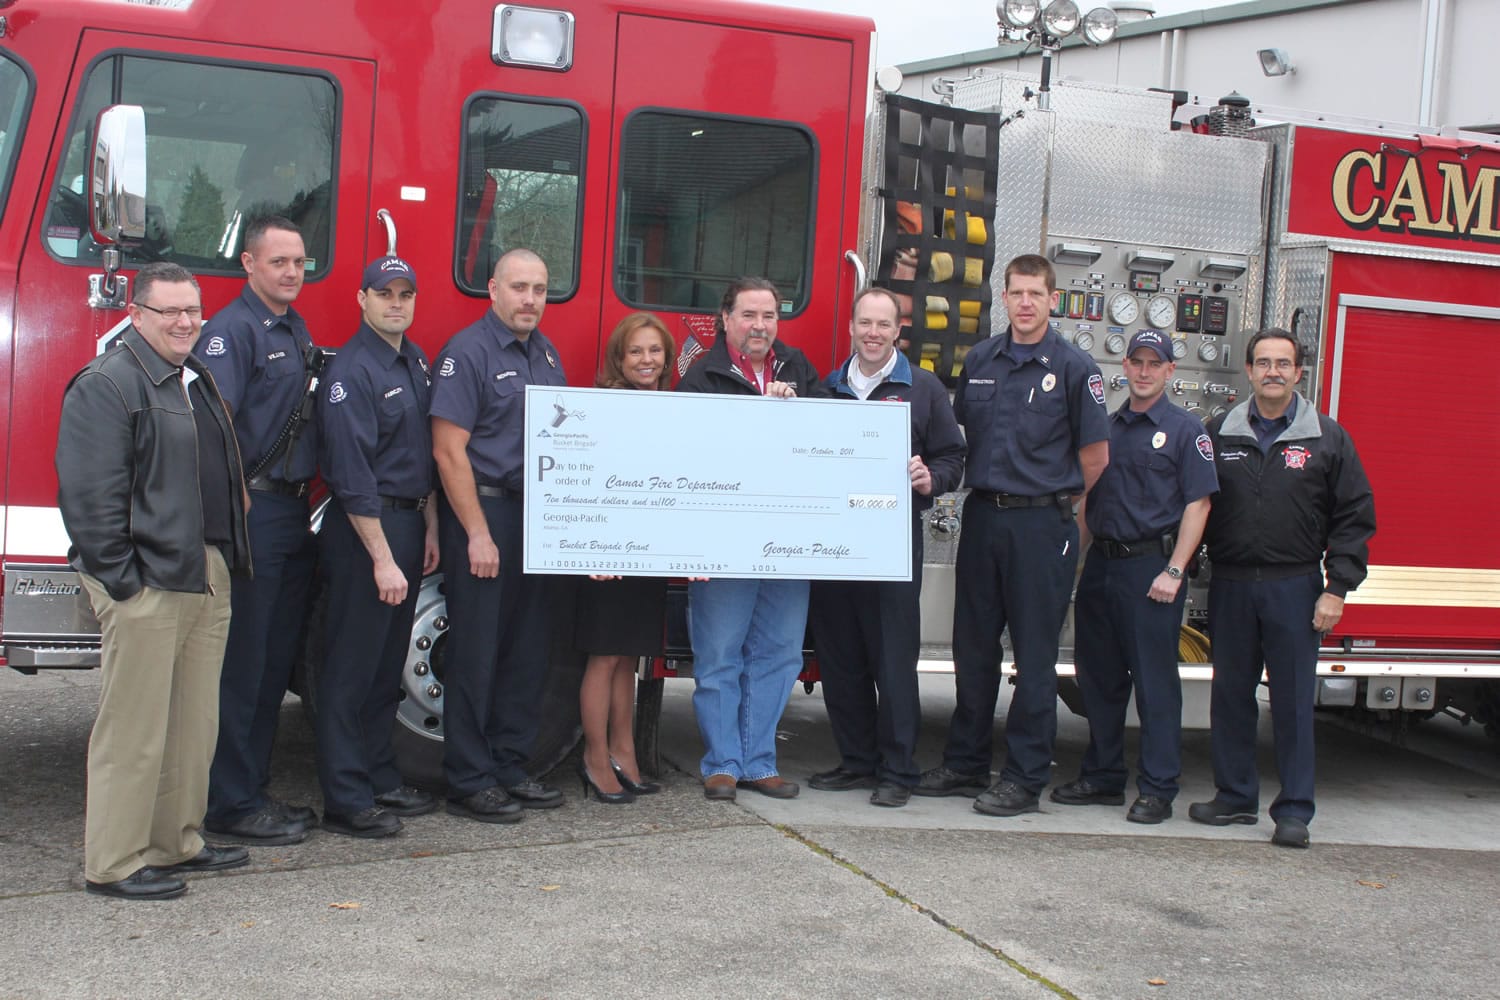 Georgia-Pacific officials presented a check for $10,000 to the Camas Fire Department.